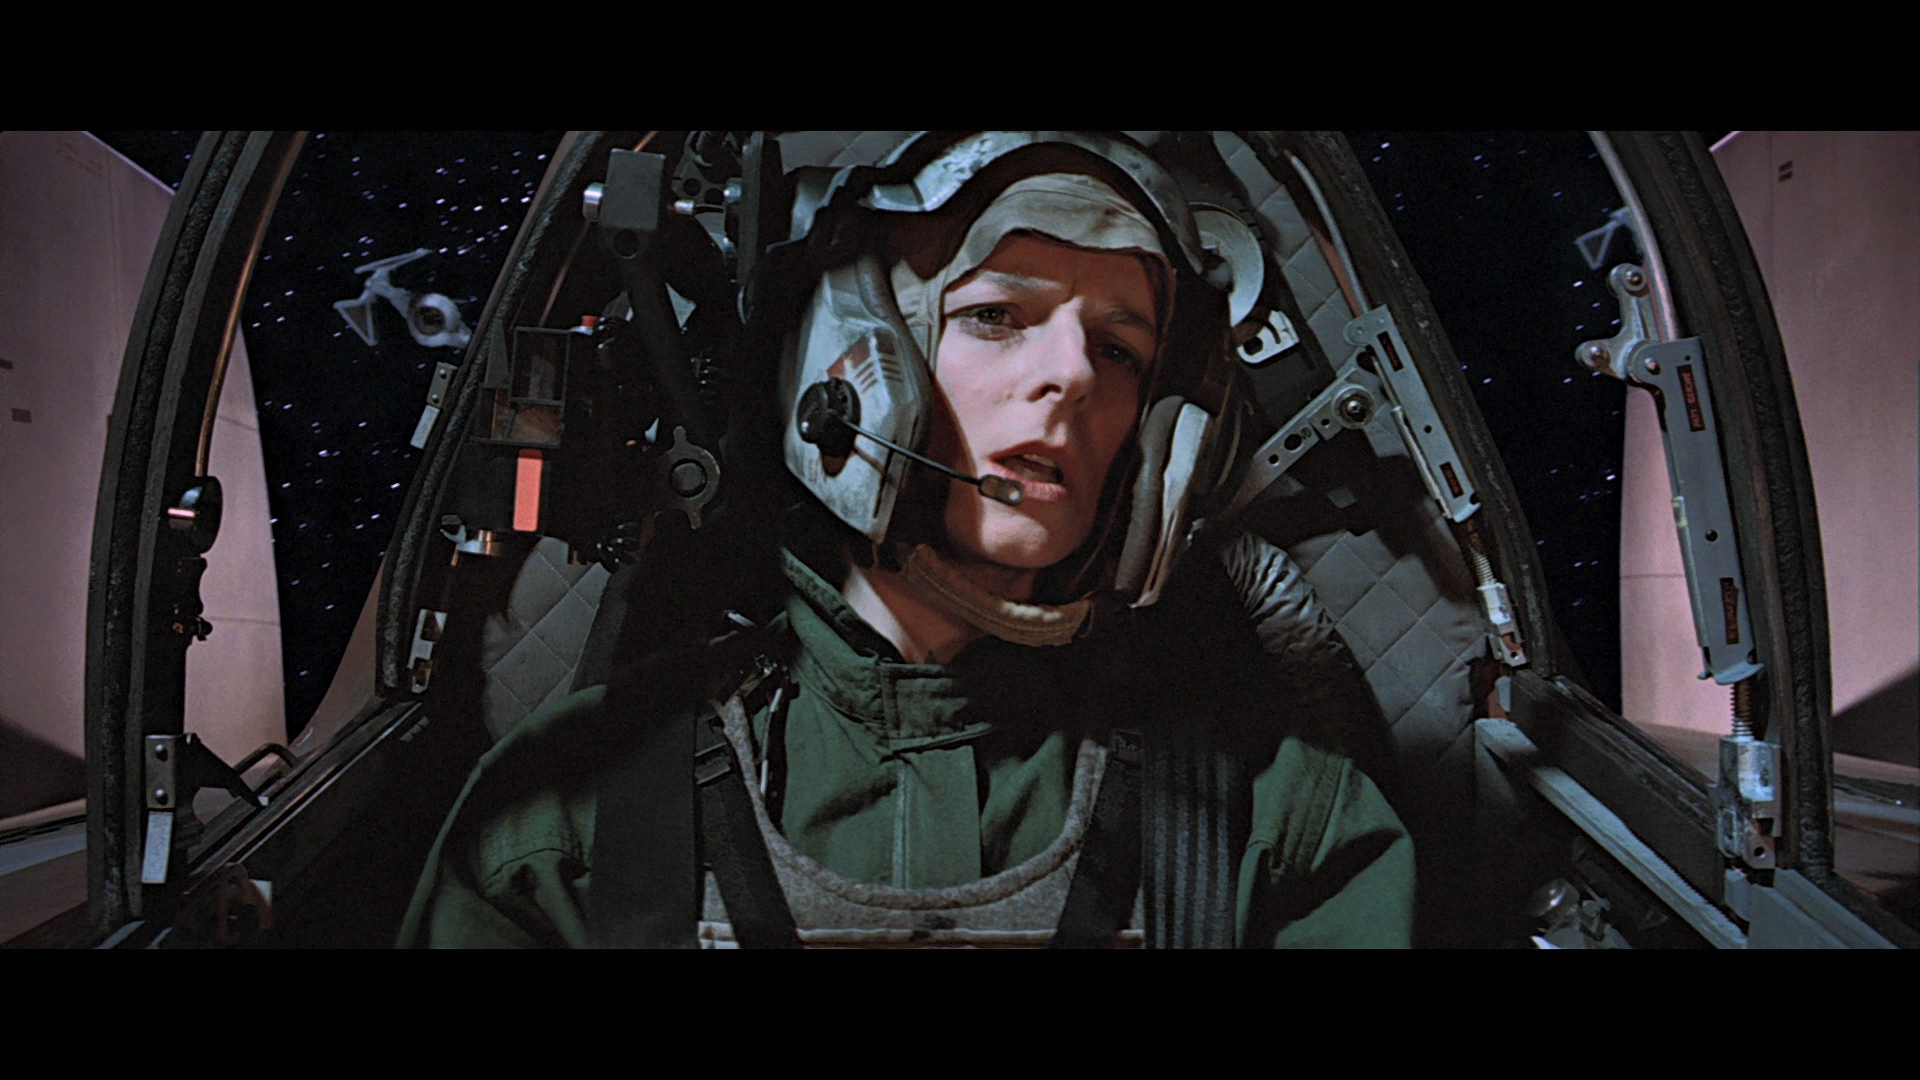 STAR WARS: RETURN OF THE JEDI (1983) - Production-Made A-Wing Pilot Helmet - Image 11 of 11